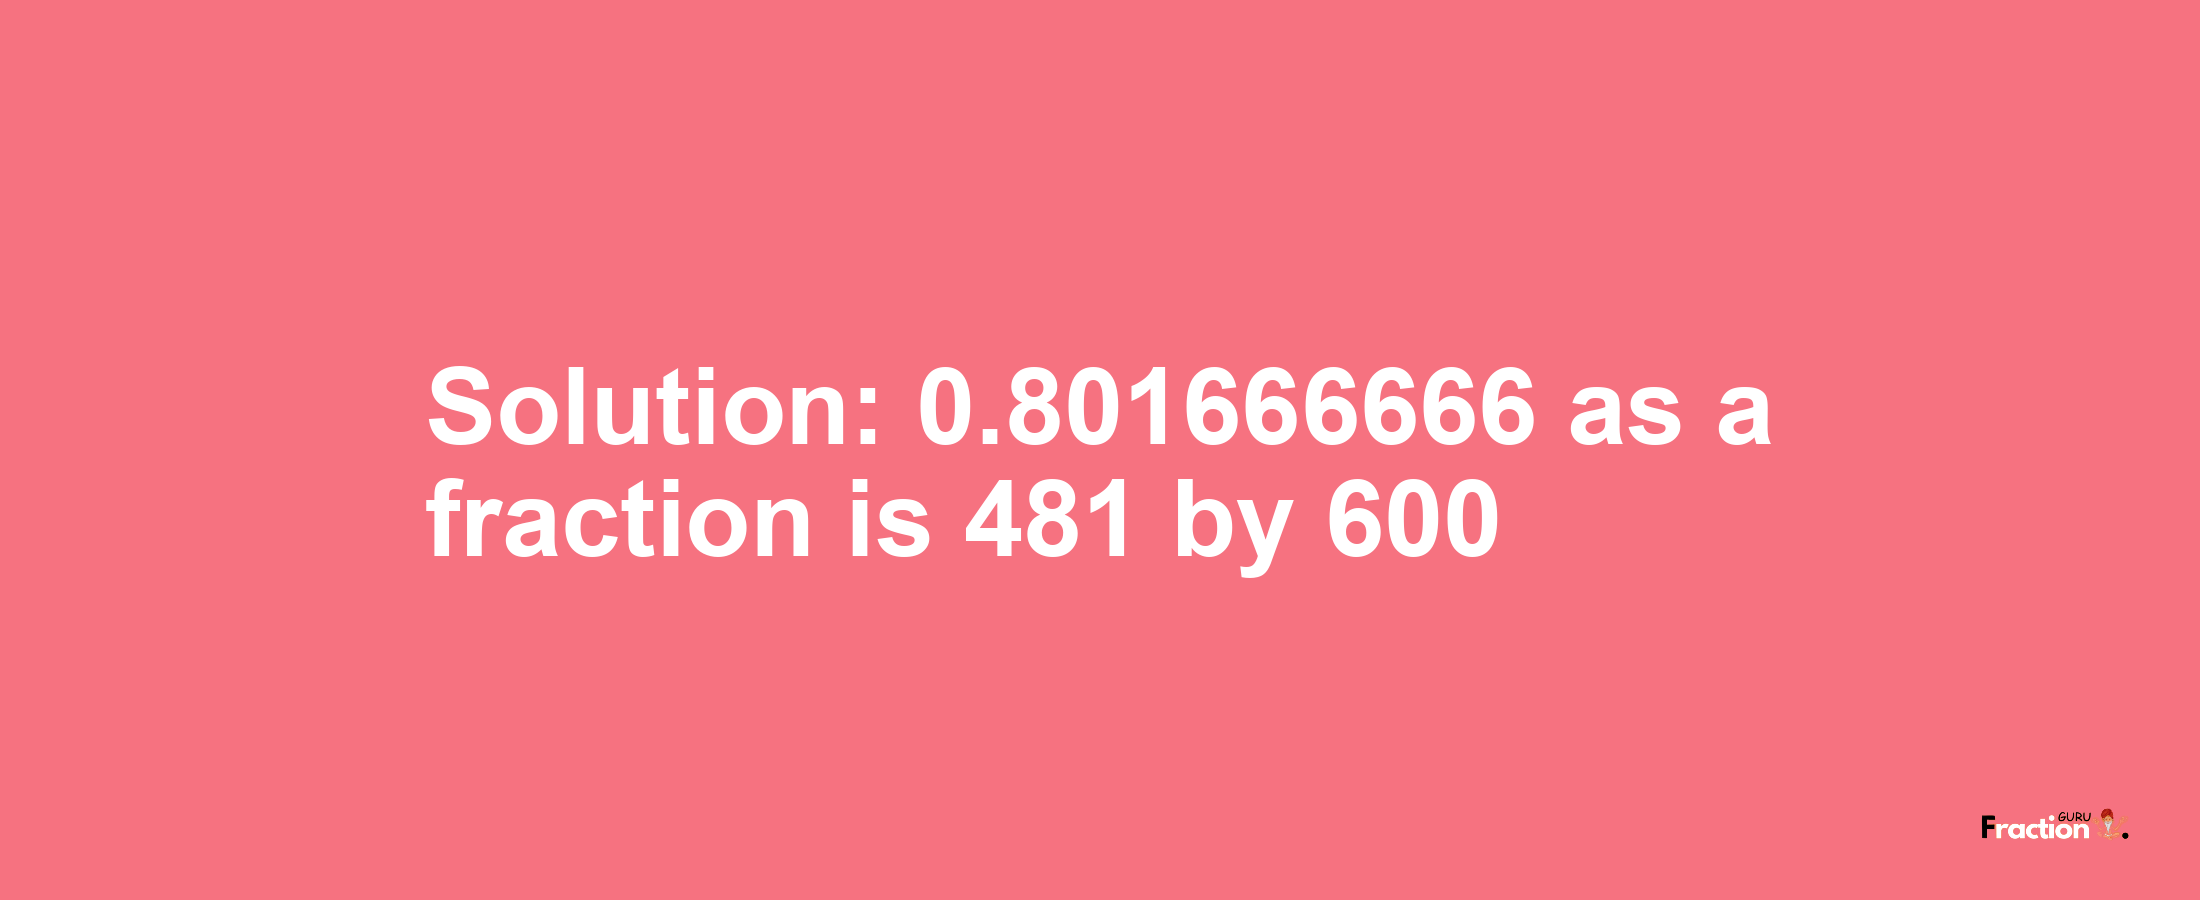 Solution:0.801666666 as a fraction is 481/600